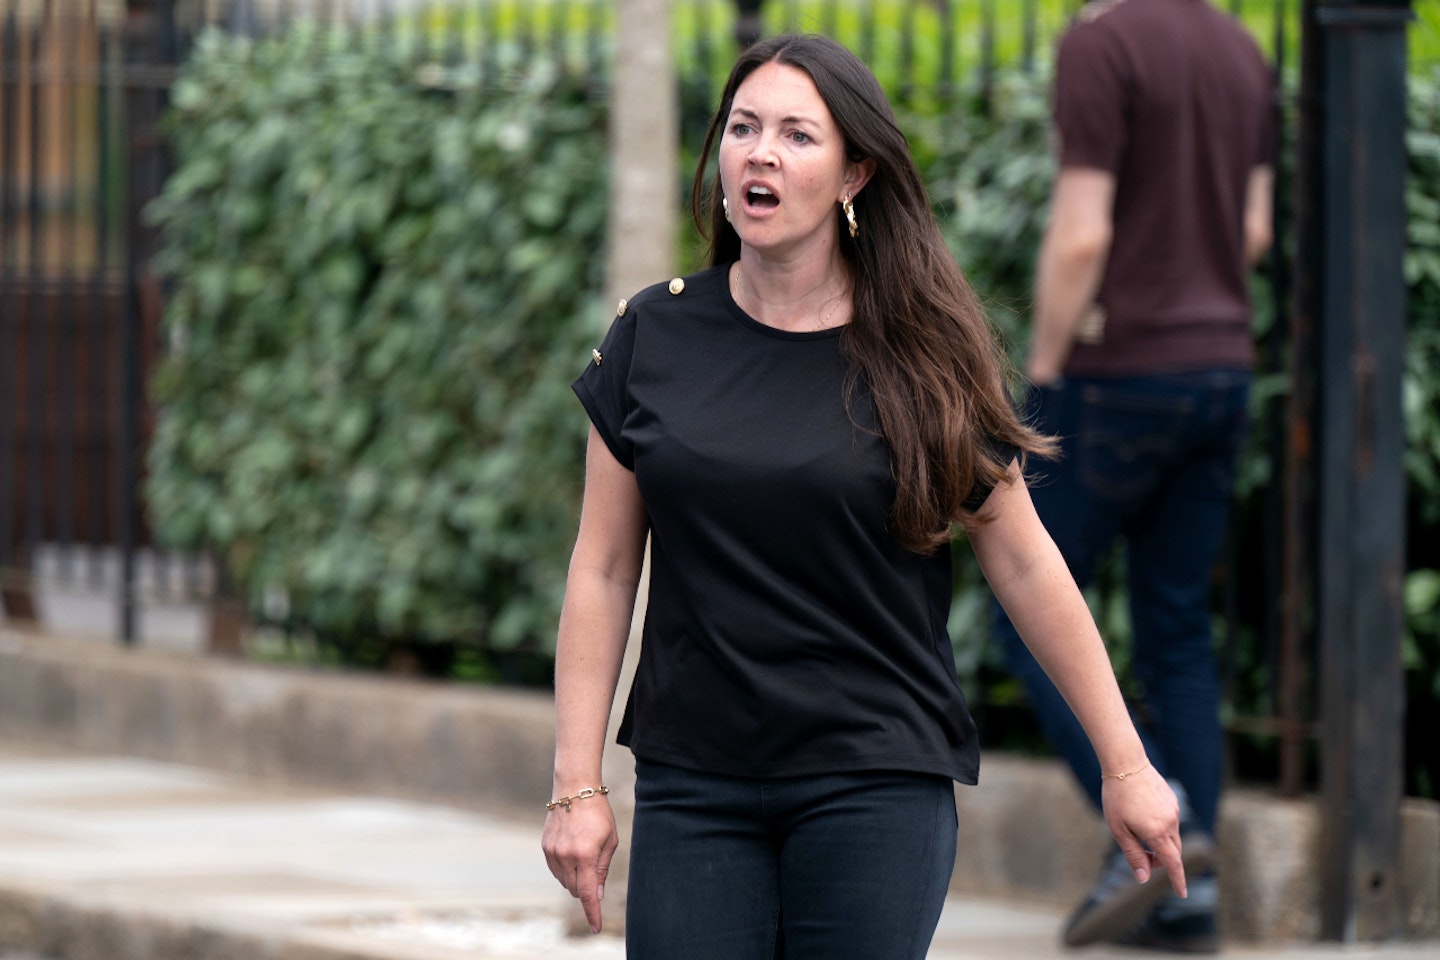 Lacey Turner as Stacey Slater on EastEnders